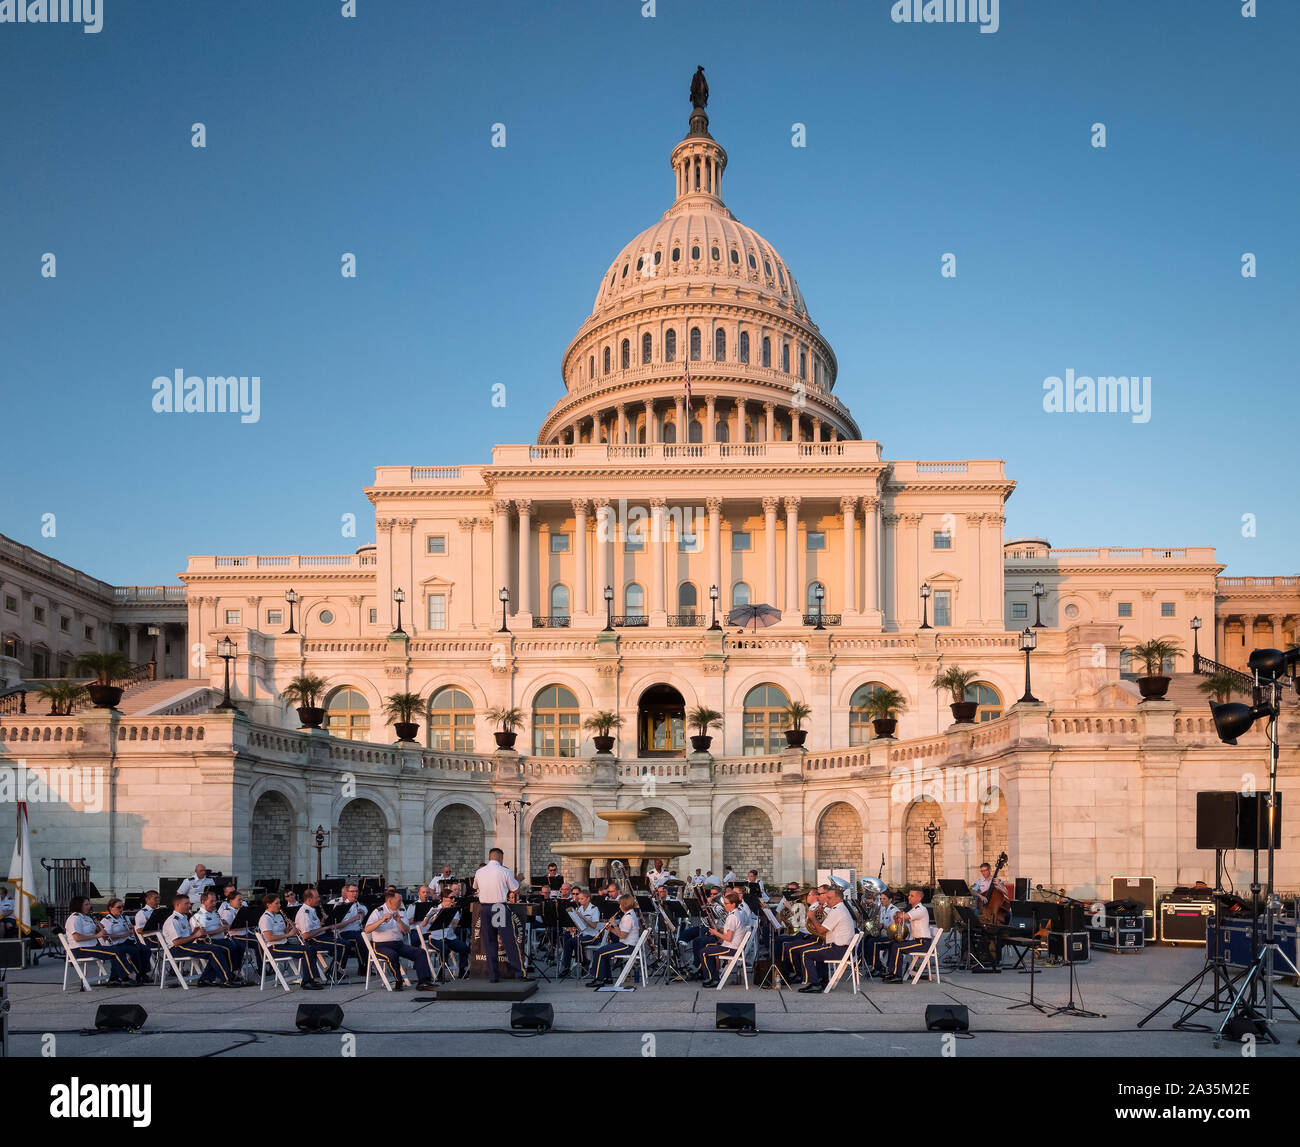 Military Band playing in front of the United States Capitol Building at sunset, Capitol Hill, Washington DC, USA Stock Photo